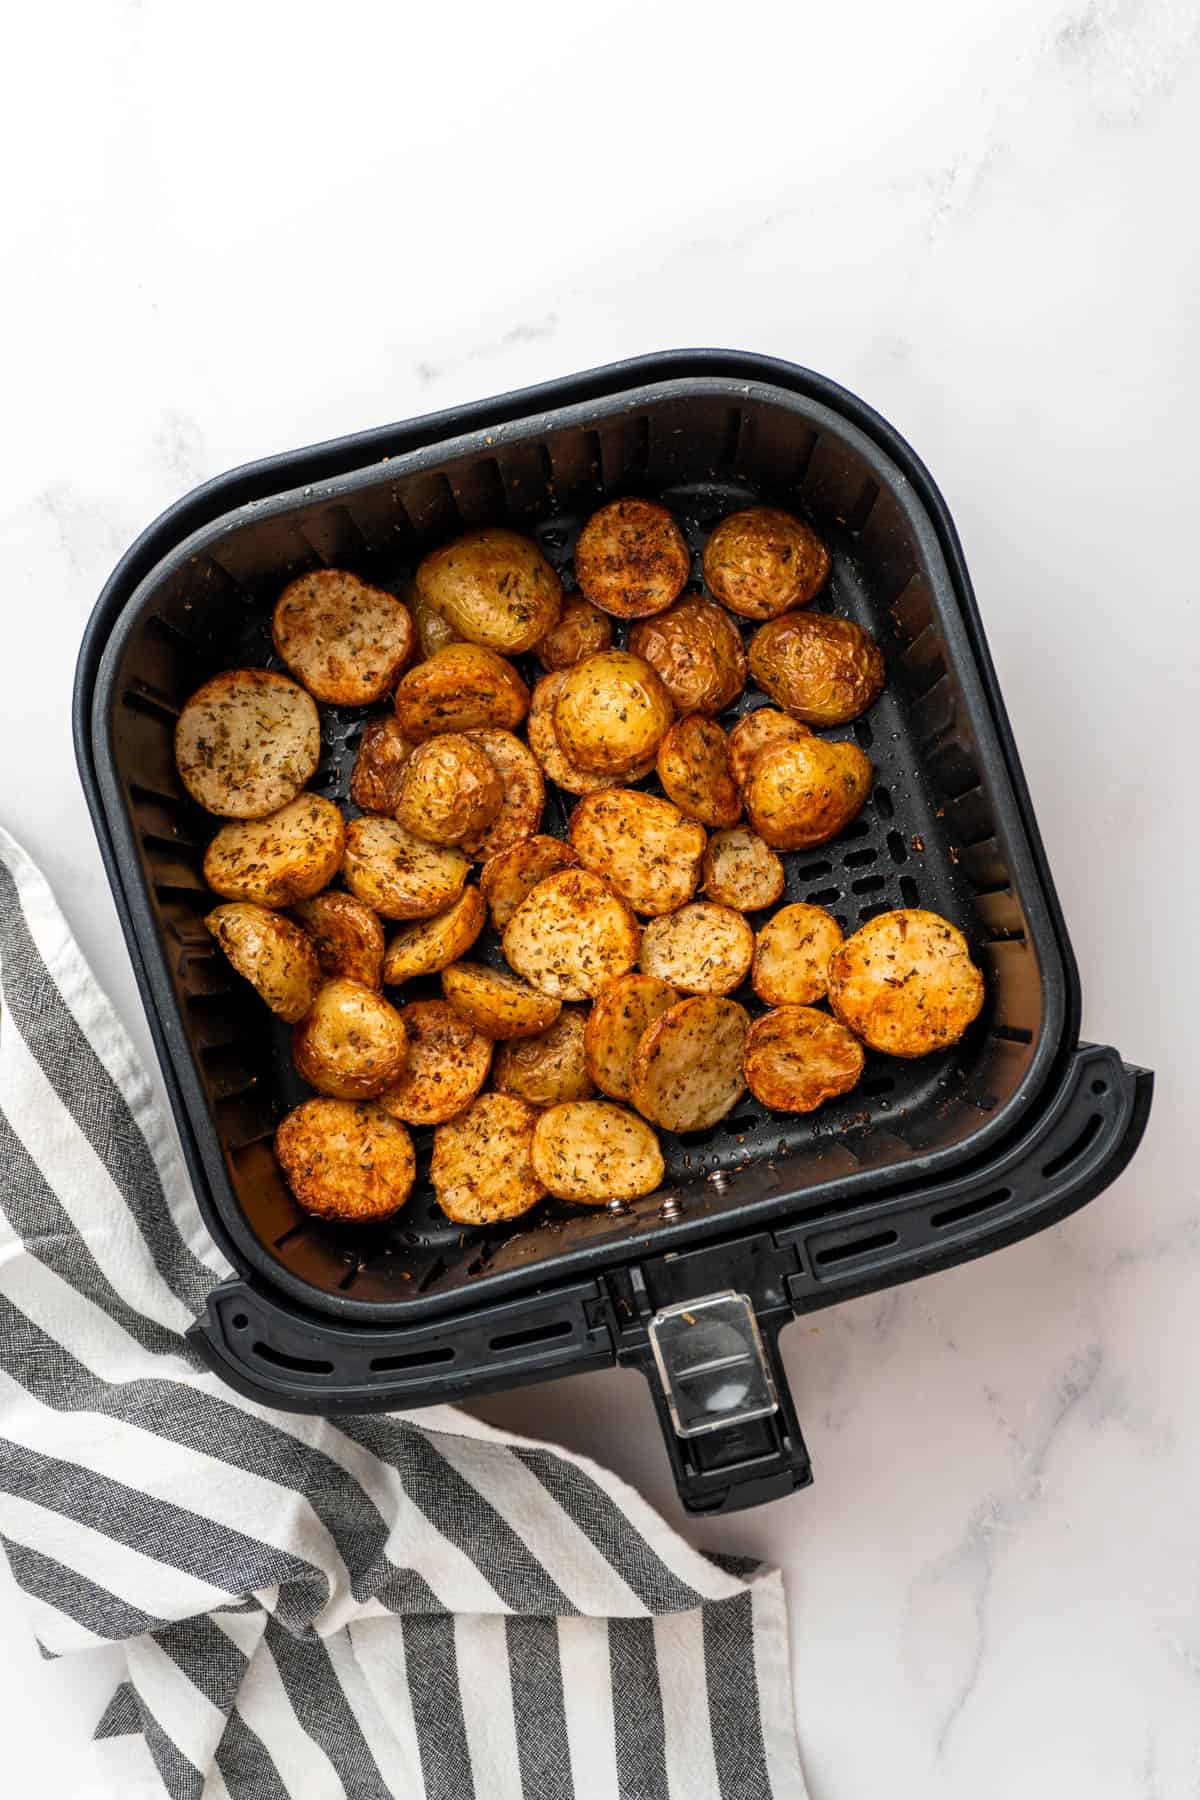 Crispy and golden air fryer greek potatoes in the air fryer basket after cooking. 